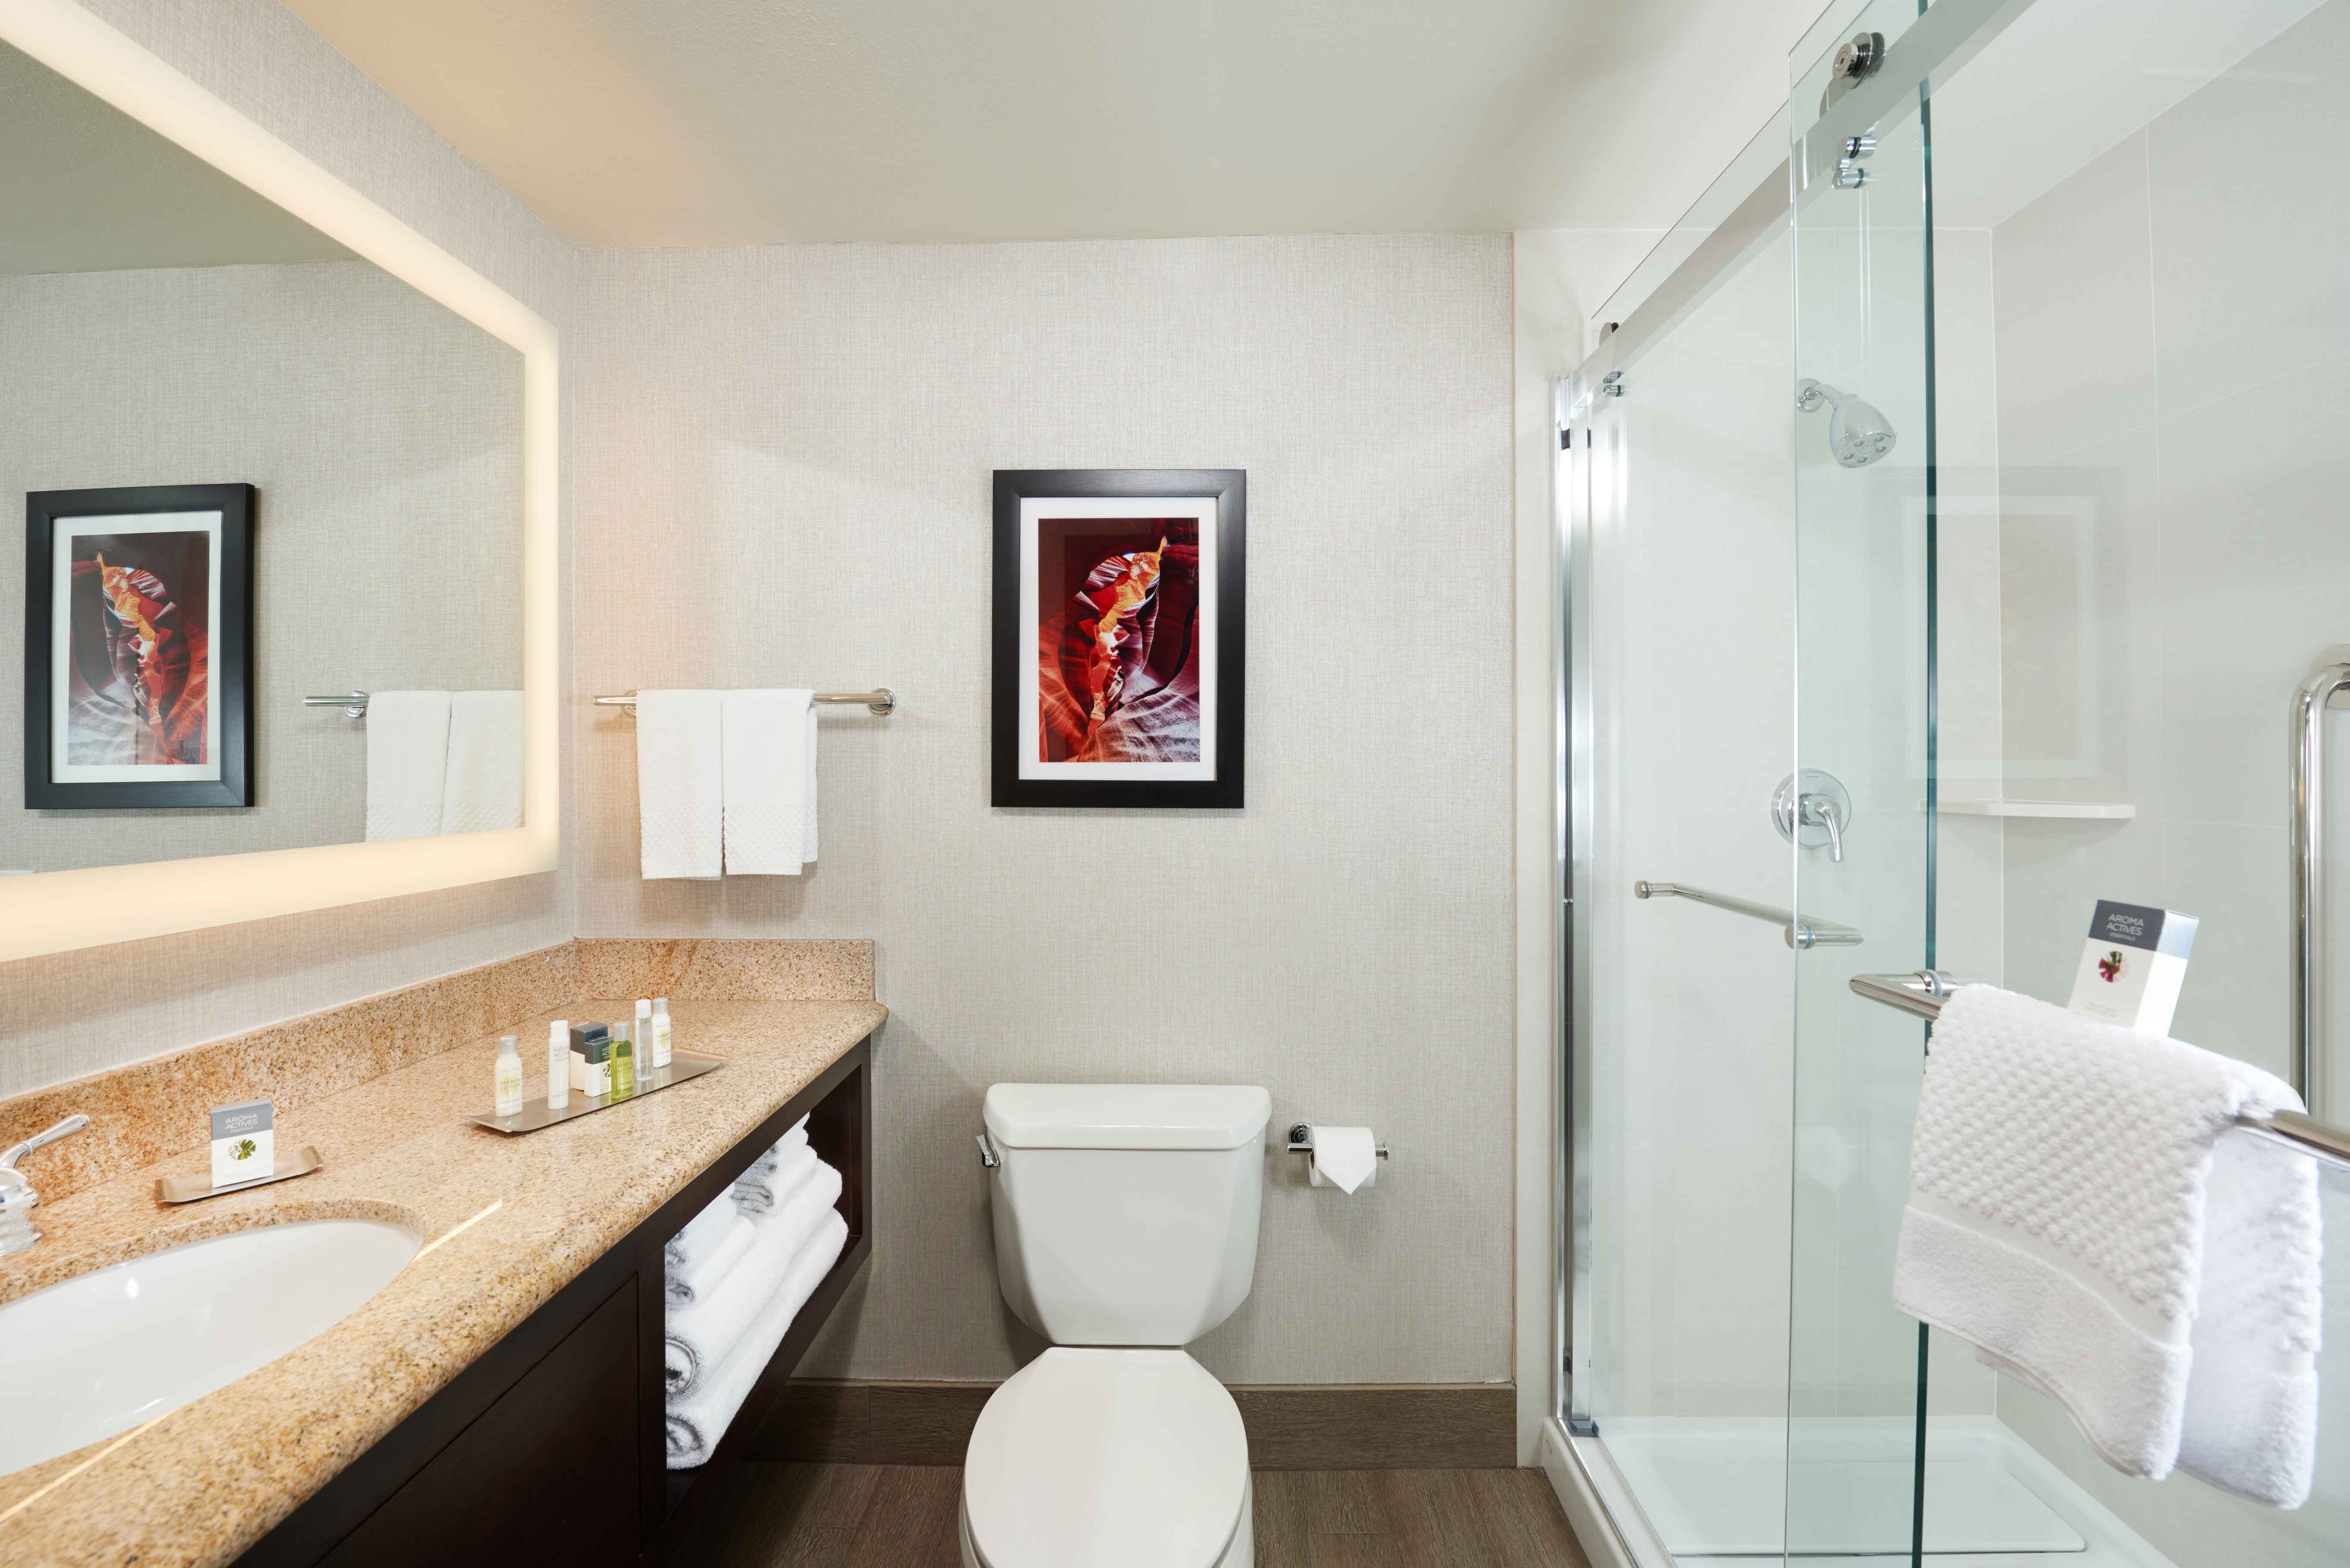 Large Vanity Mirror, Sink, Fresh Towels, Amenities, Toiletries, Wall Art Above Toilet, and Shower With Glass Doors